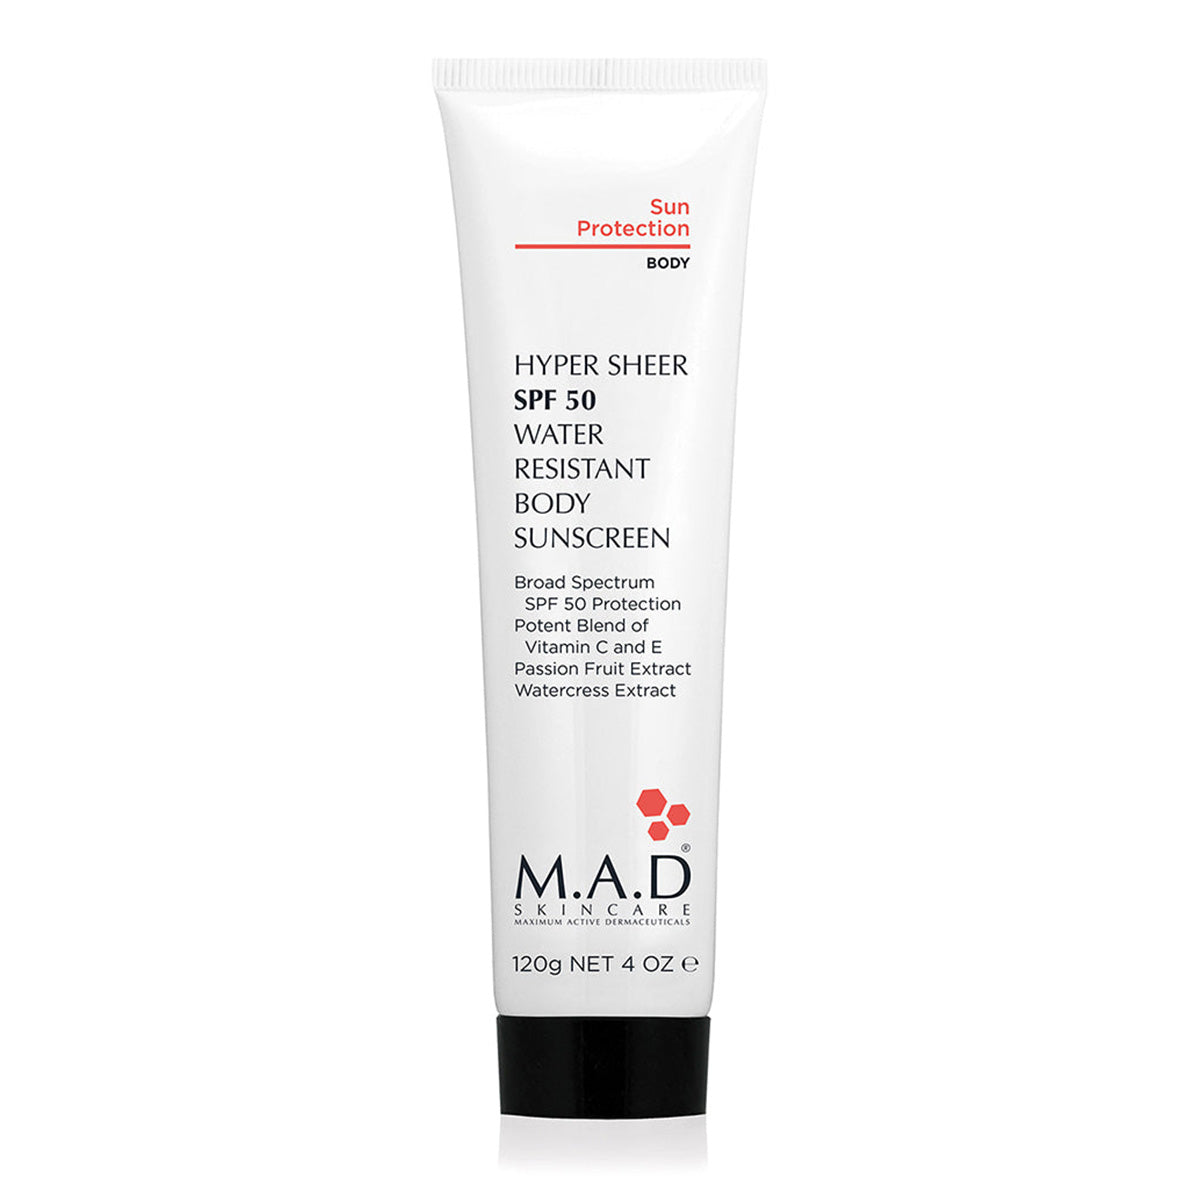 M.A.D Hyper Sheer SPF 50 water Res. Body Lotion